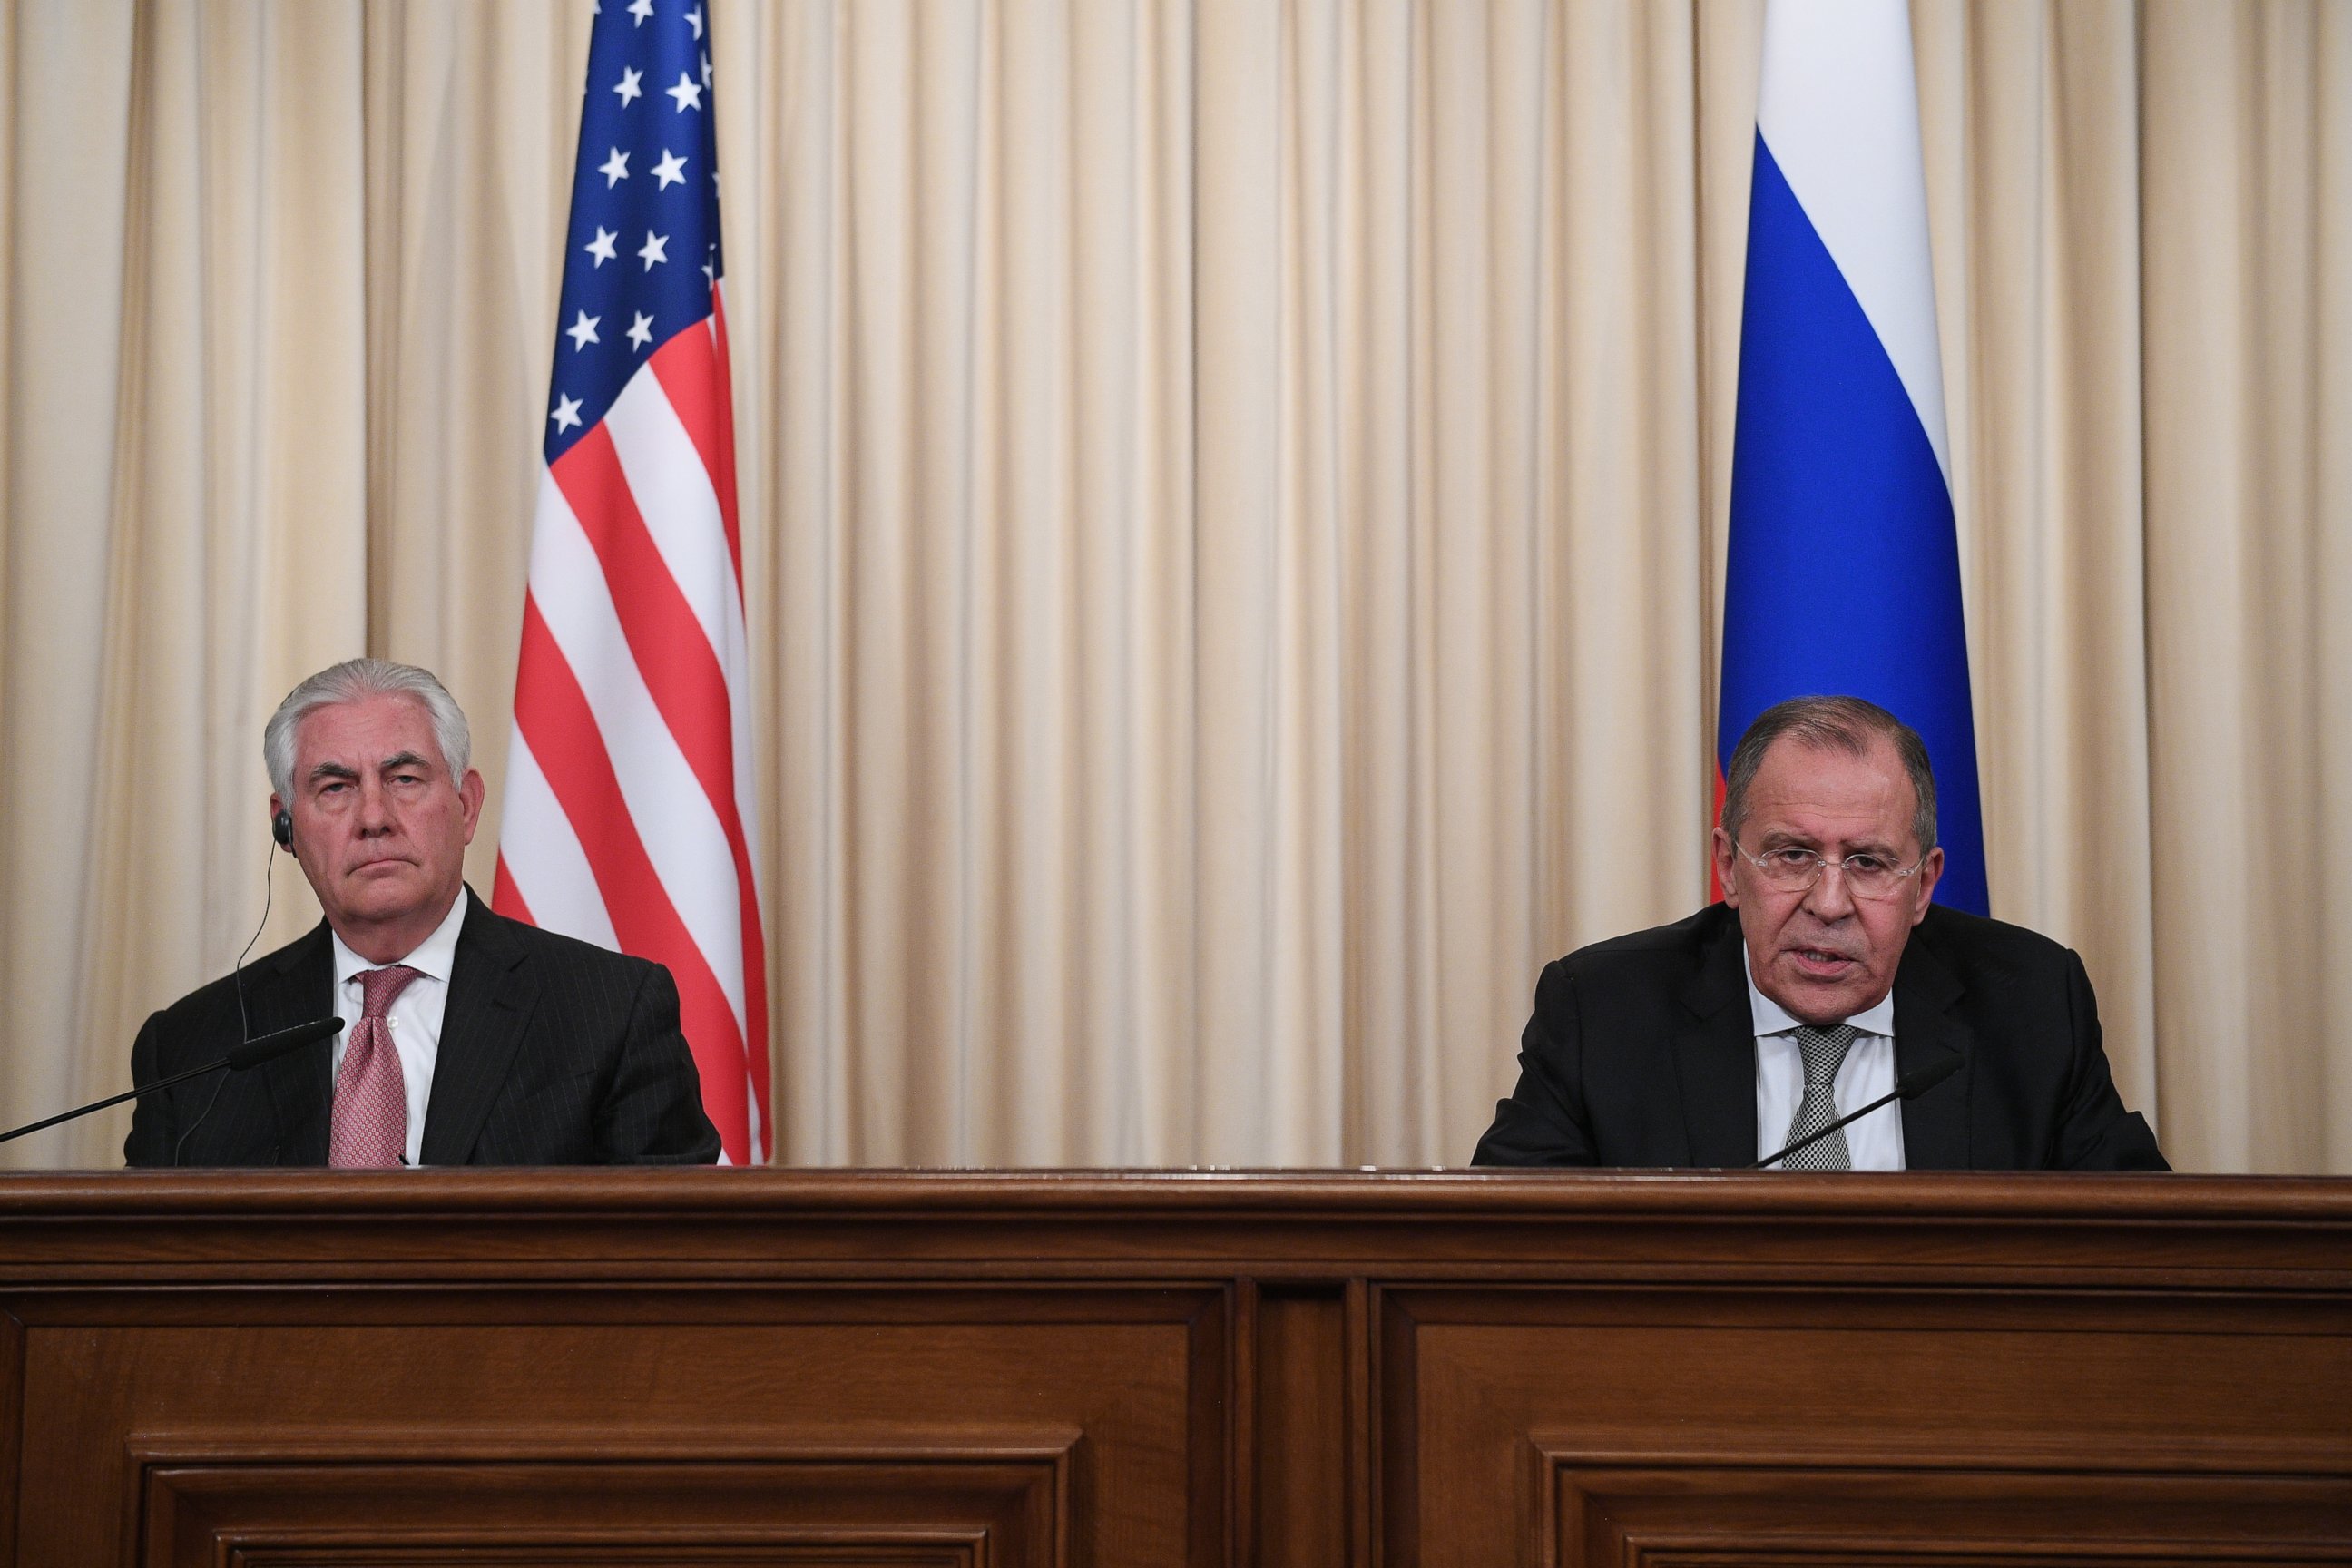 PHOTO: Russian Foreign Minister Sergei Lavrov, right, and U.S. Secretary of State Rex Tillerson during the joint news conference following their talks in Moscow.